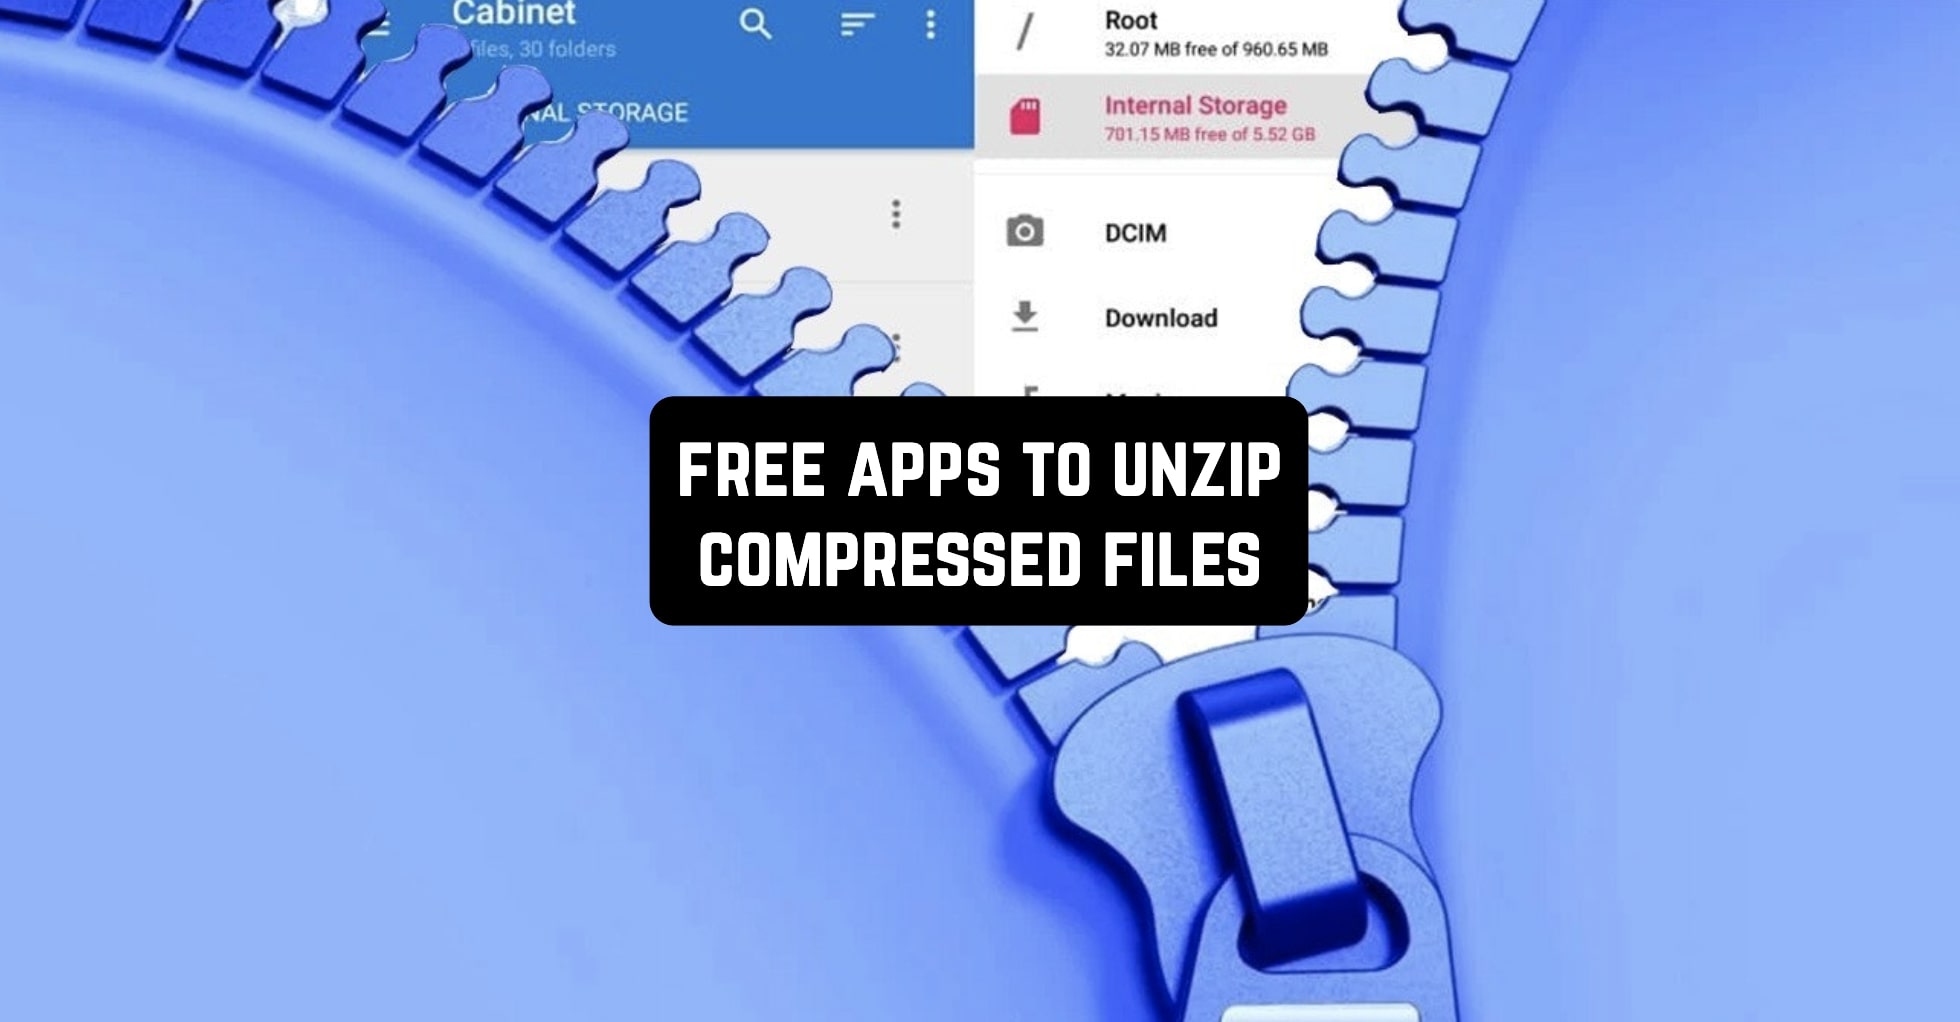 Free-Apps-To-Unzip-Compressed-Files